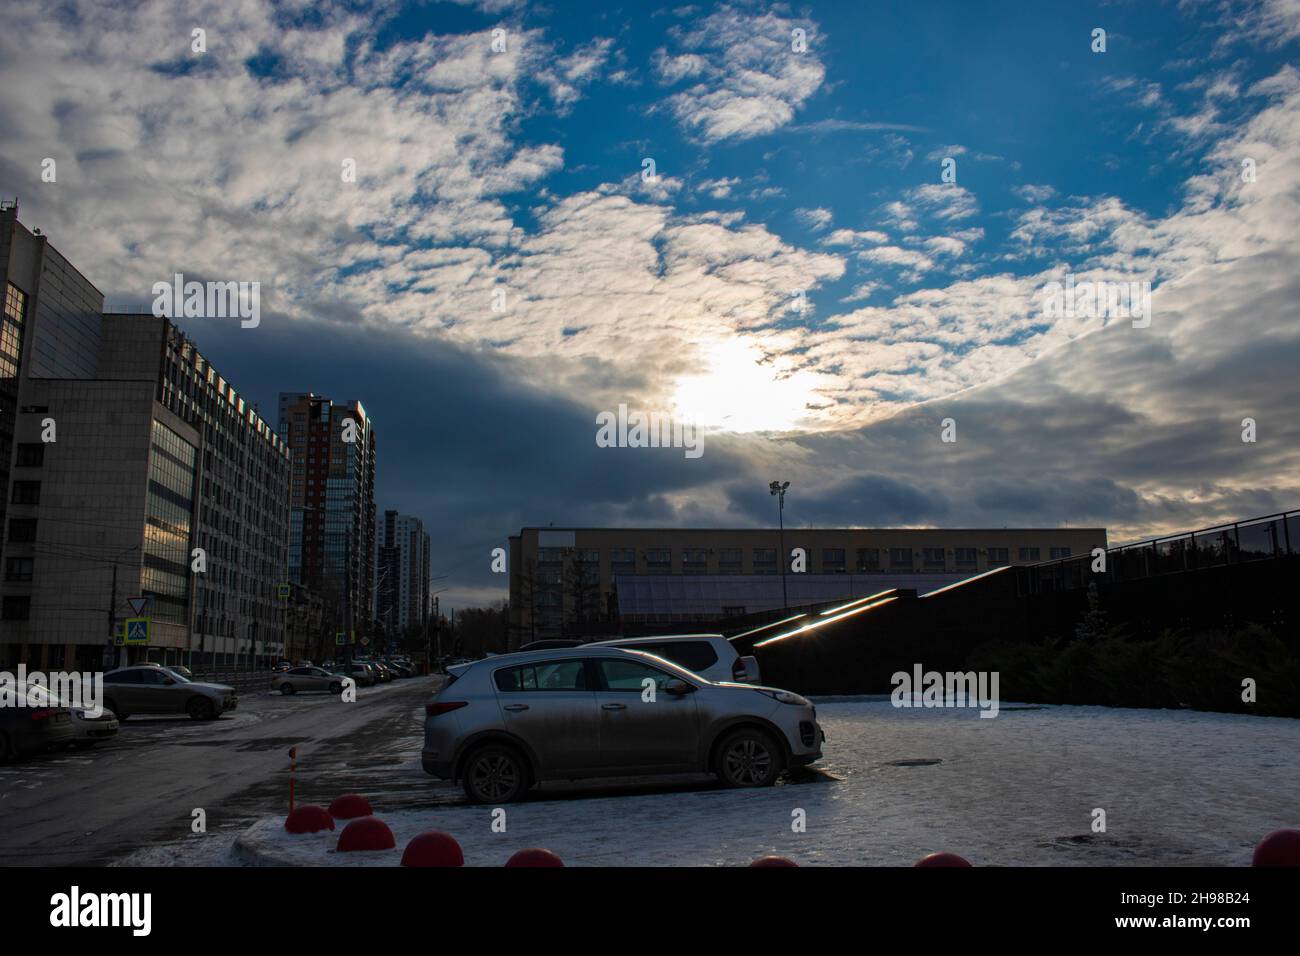 Winter urban scene. A place with a road, cars and buildings. City landscape. Stock Photo